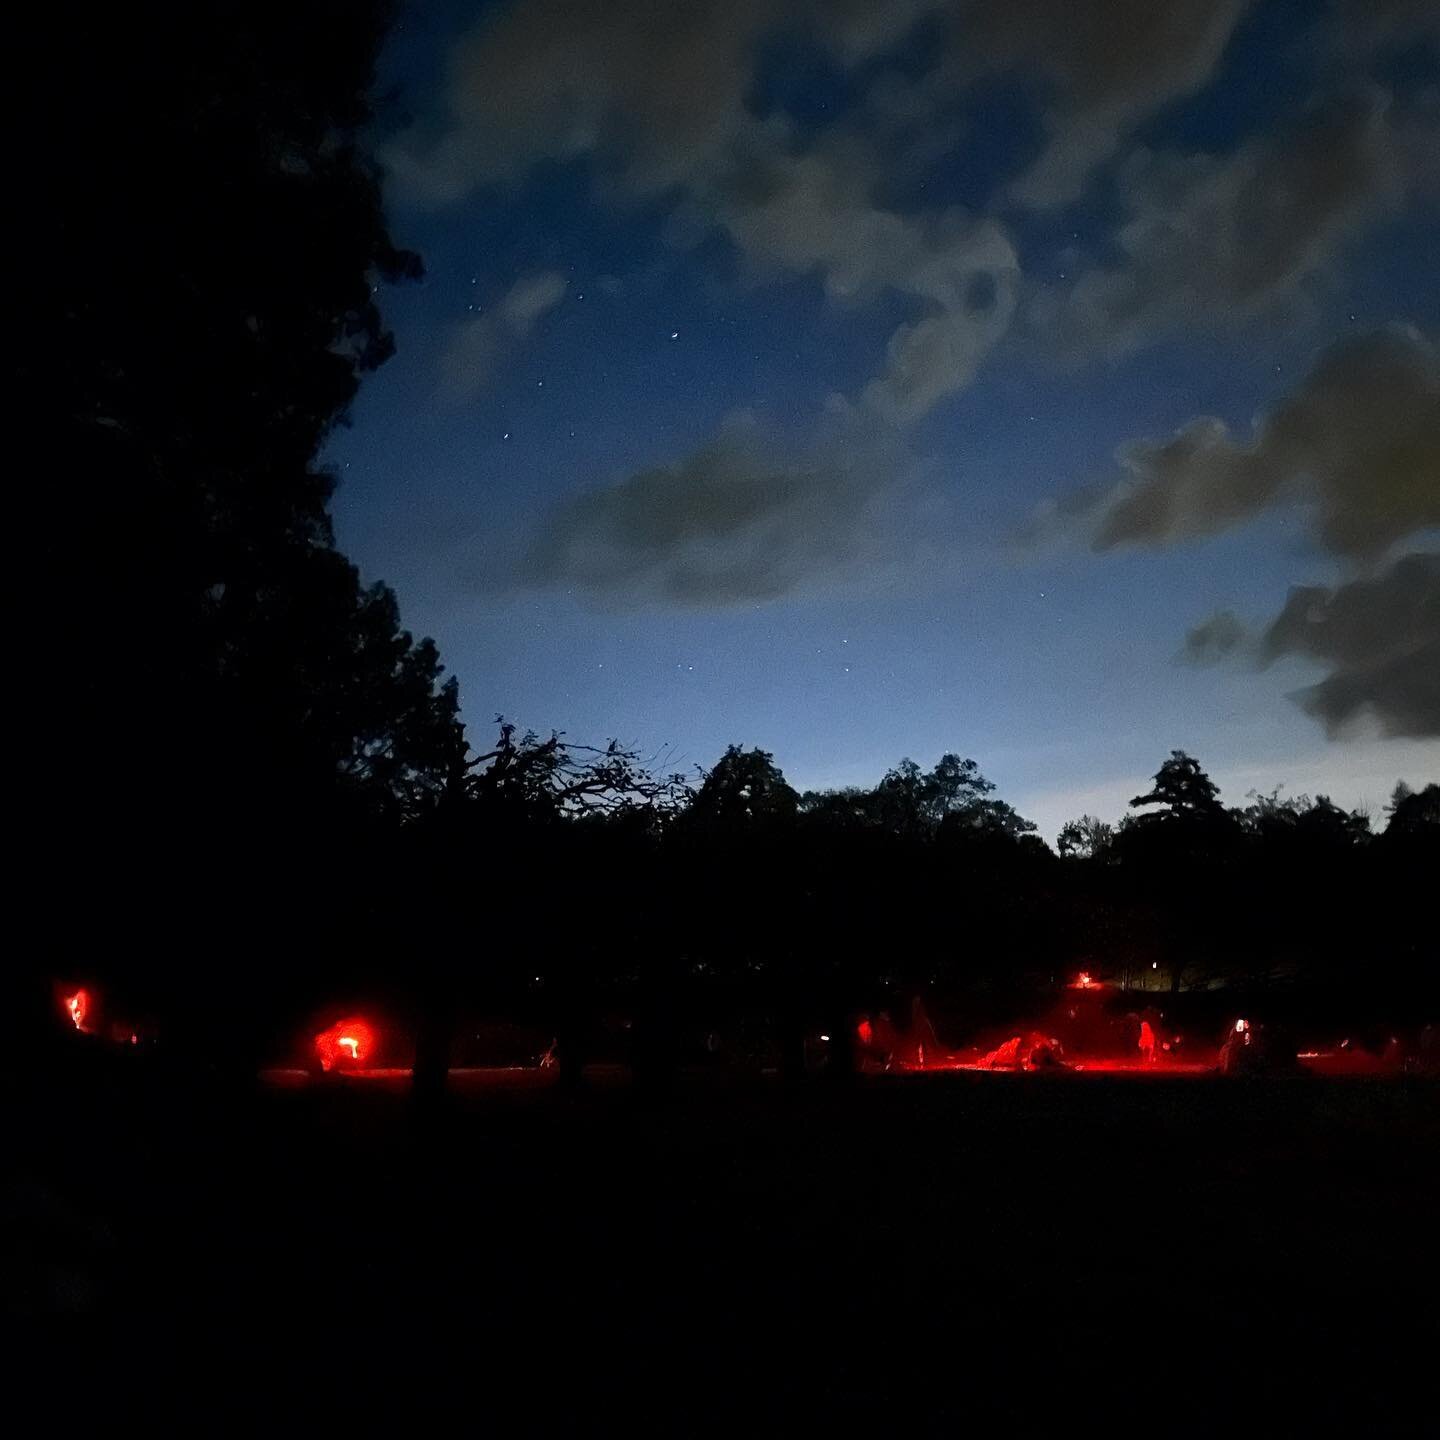 When Innisfree Garden @innisfreegarden opened this morning at 4AM the property was full of people with red lights hoping to find the perfect spot to view the Perseids Meteor Shower. Unfortunately clouds got in the way. And yet, it was well worth atte